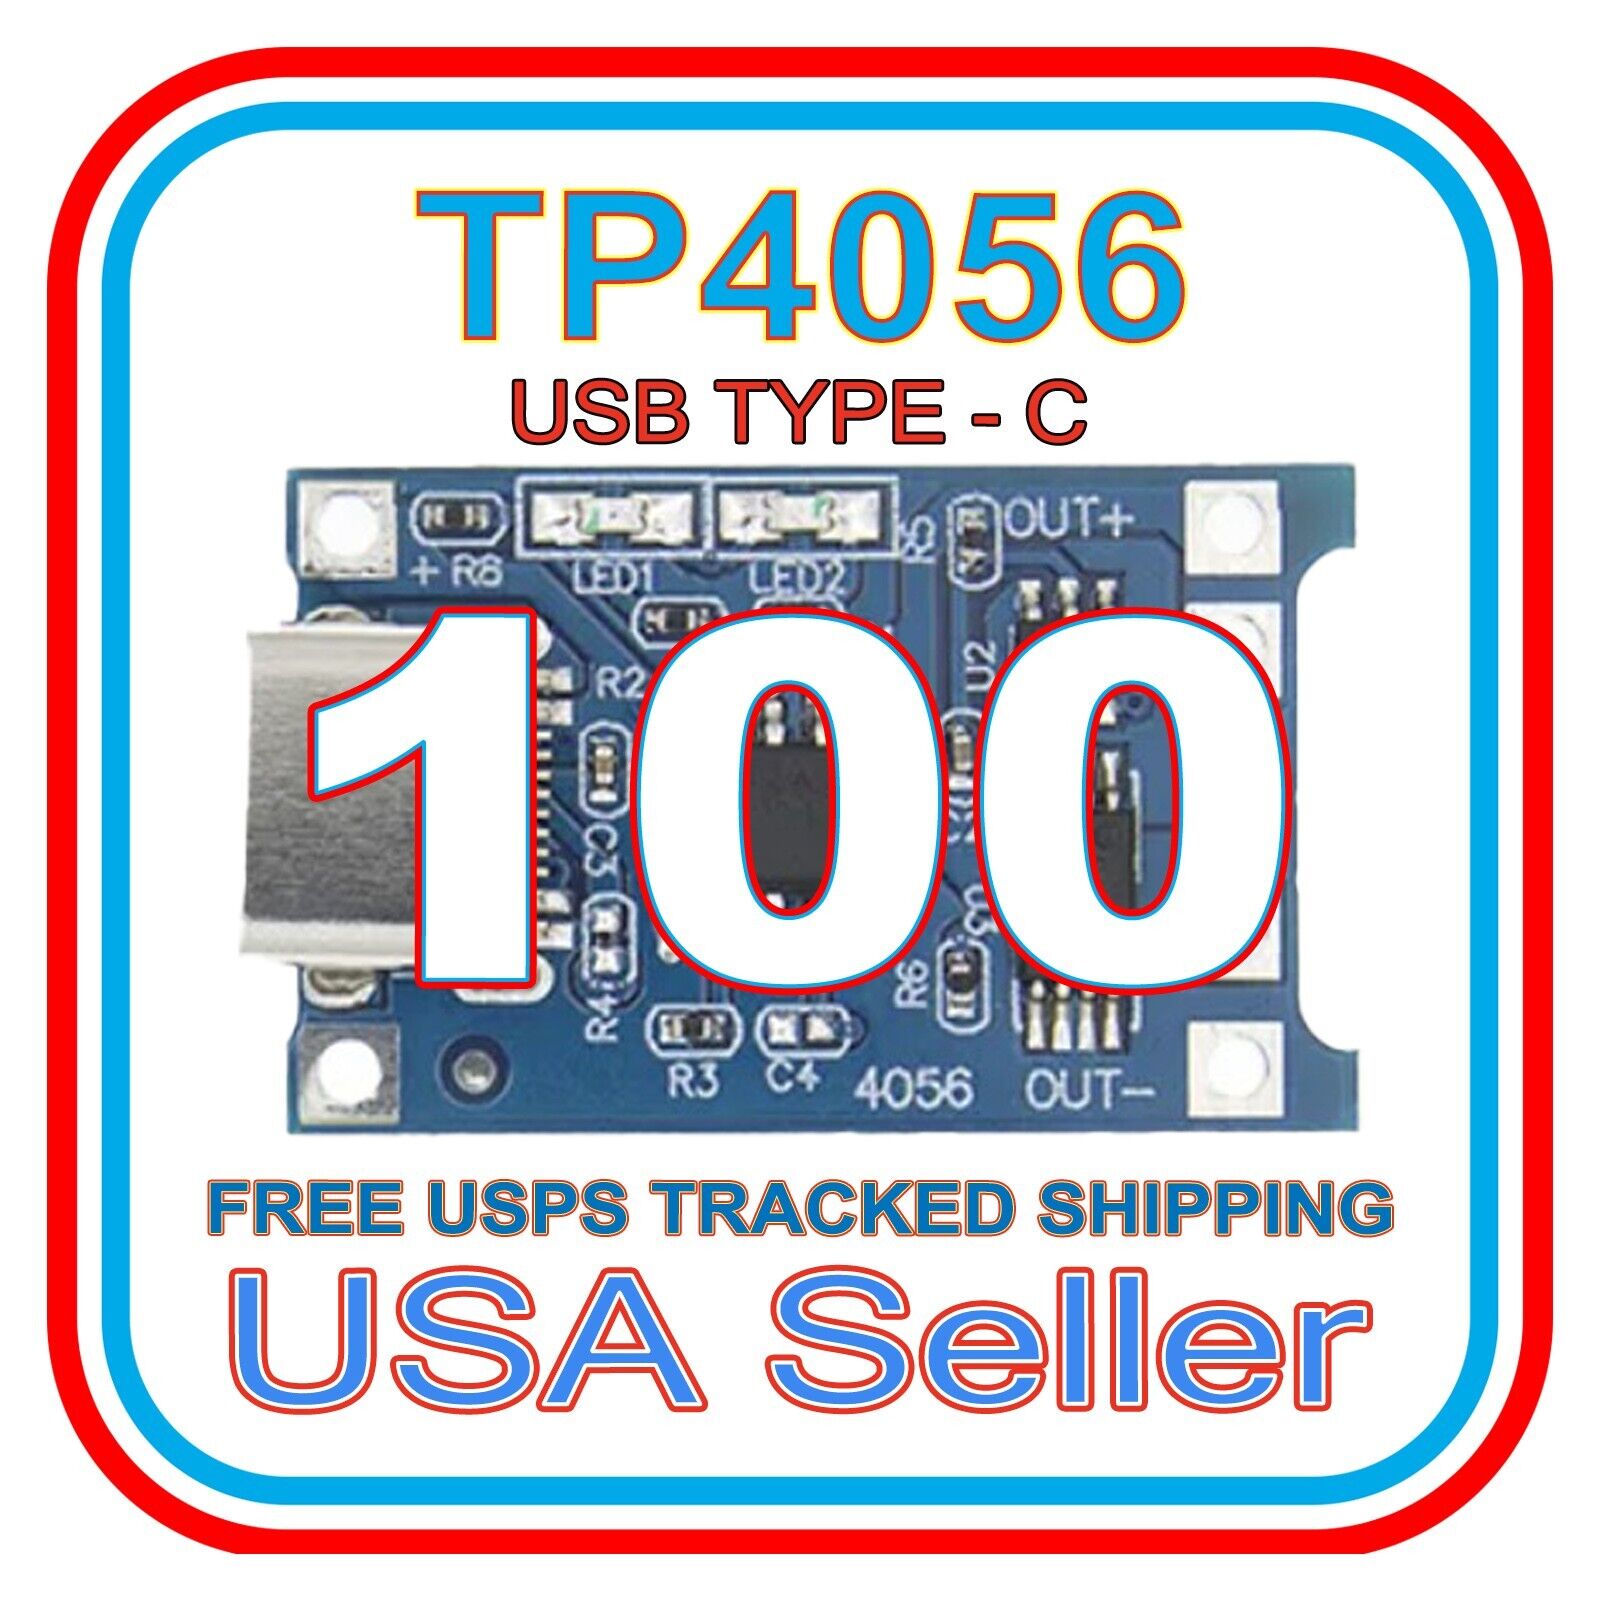 TP4056 Type-C USB 18650 Li-ion battery Charger FREE TRACKED SHIPPING 100 Pcs